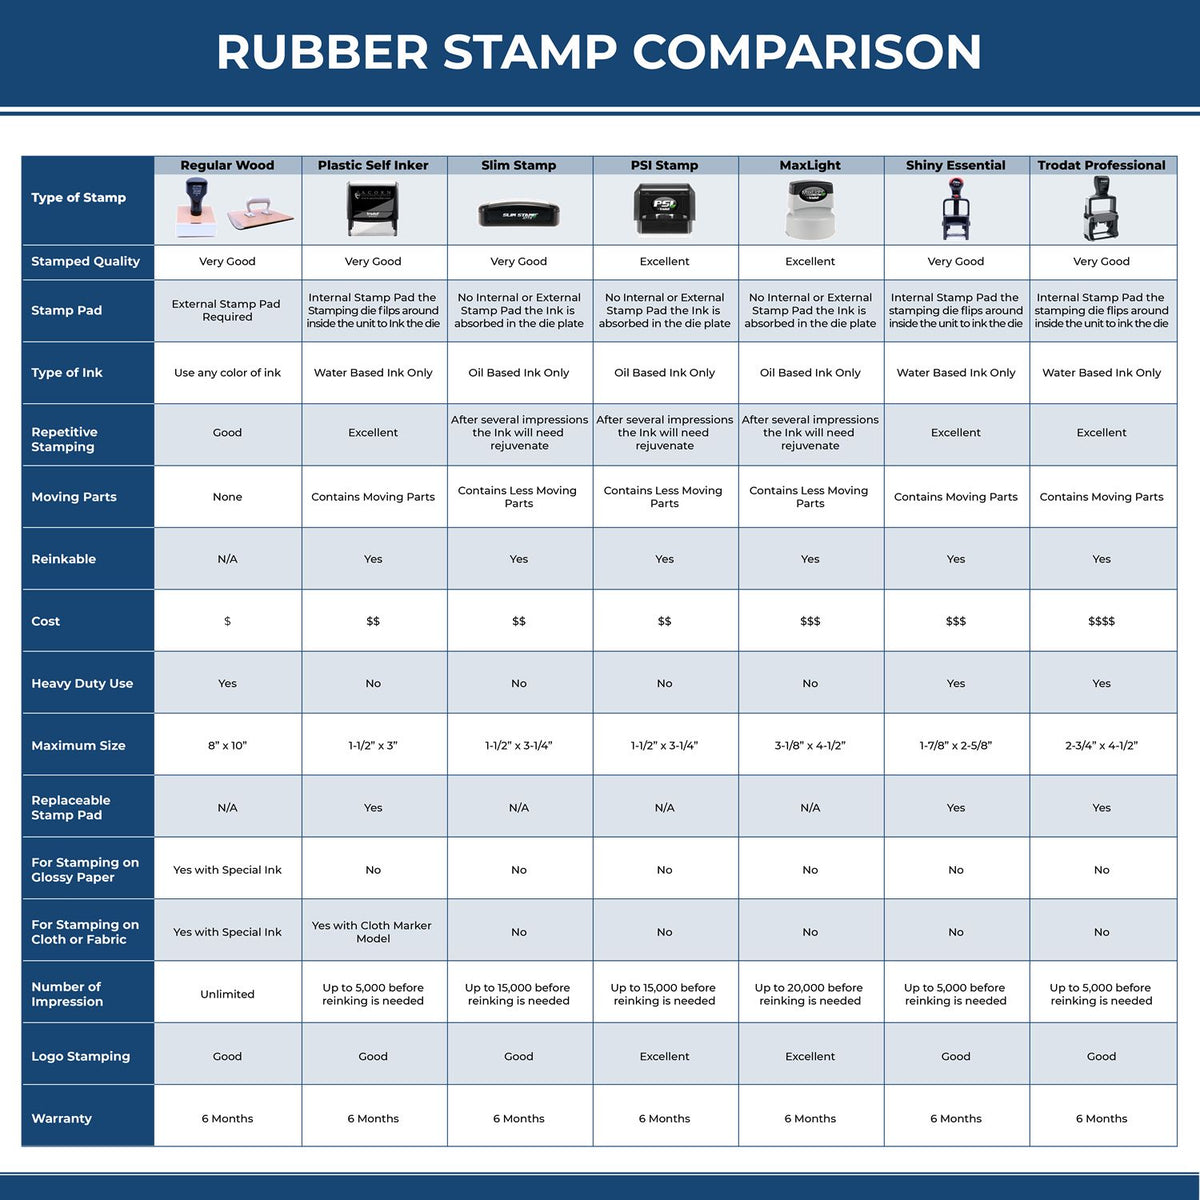 Self-Inking Temporarily Away Stamp 4758S Rubber Stamp Comparison